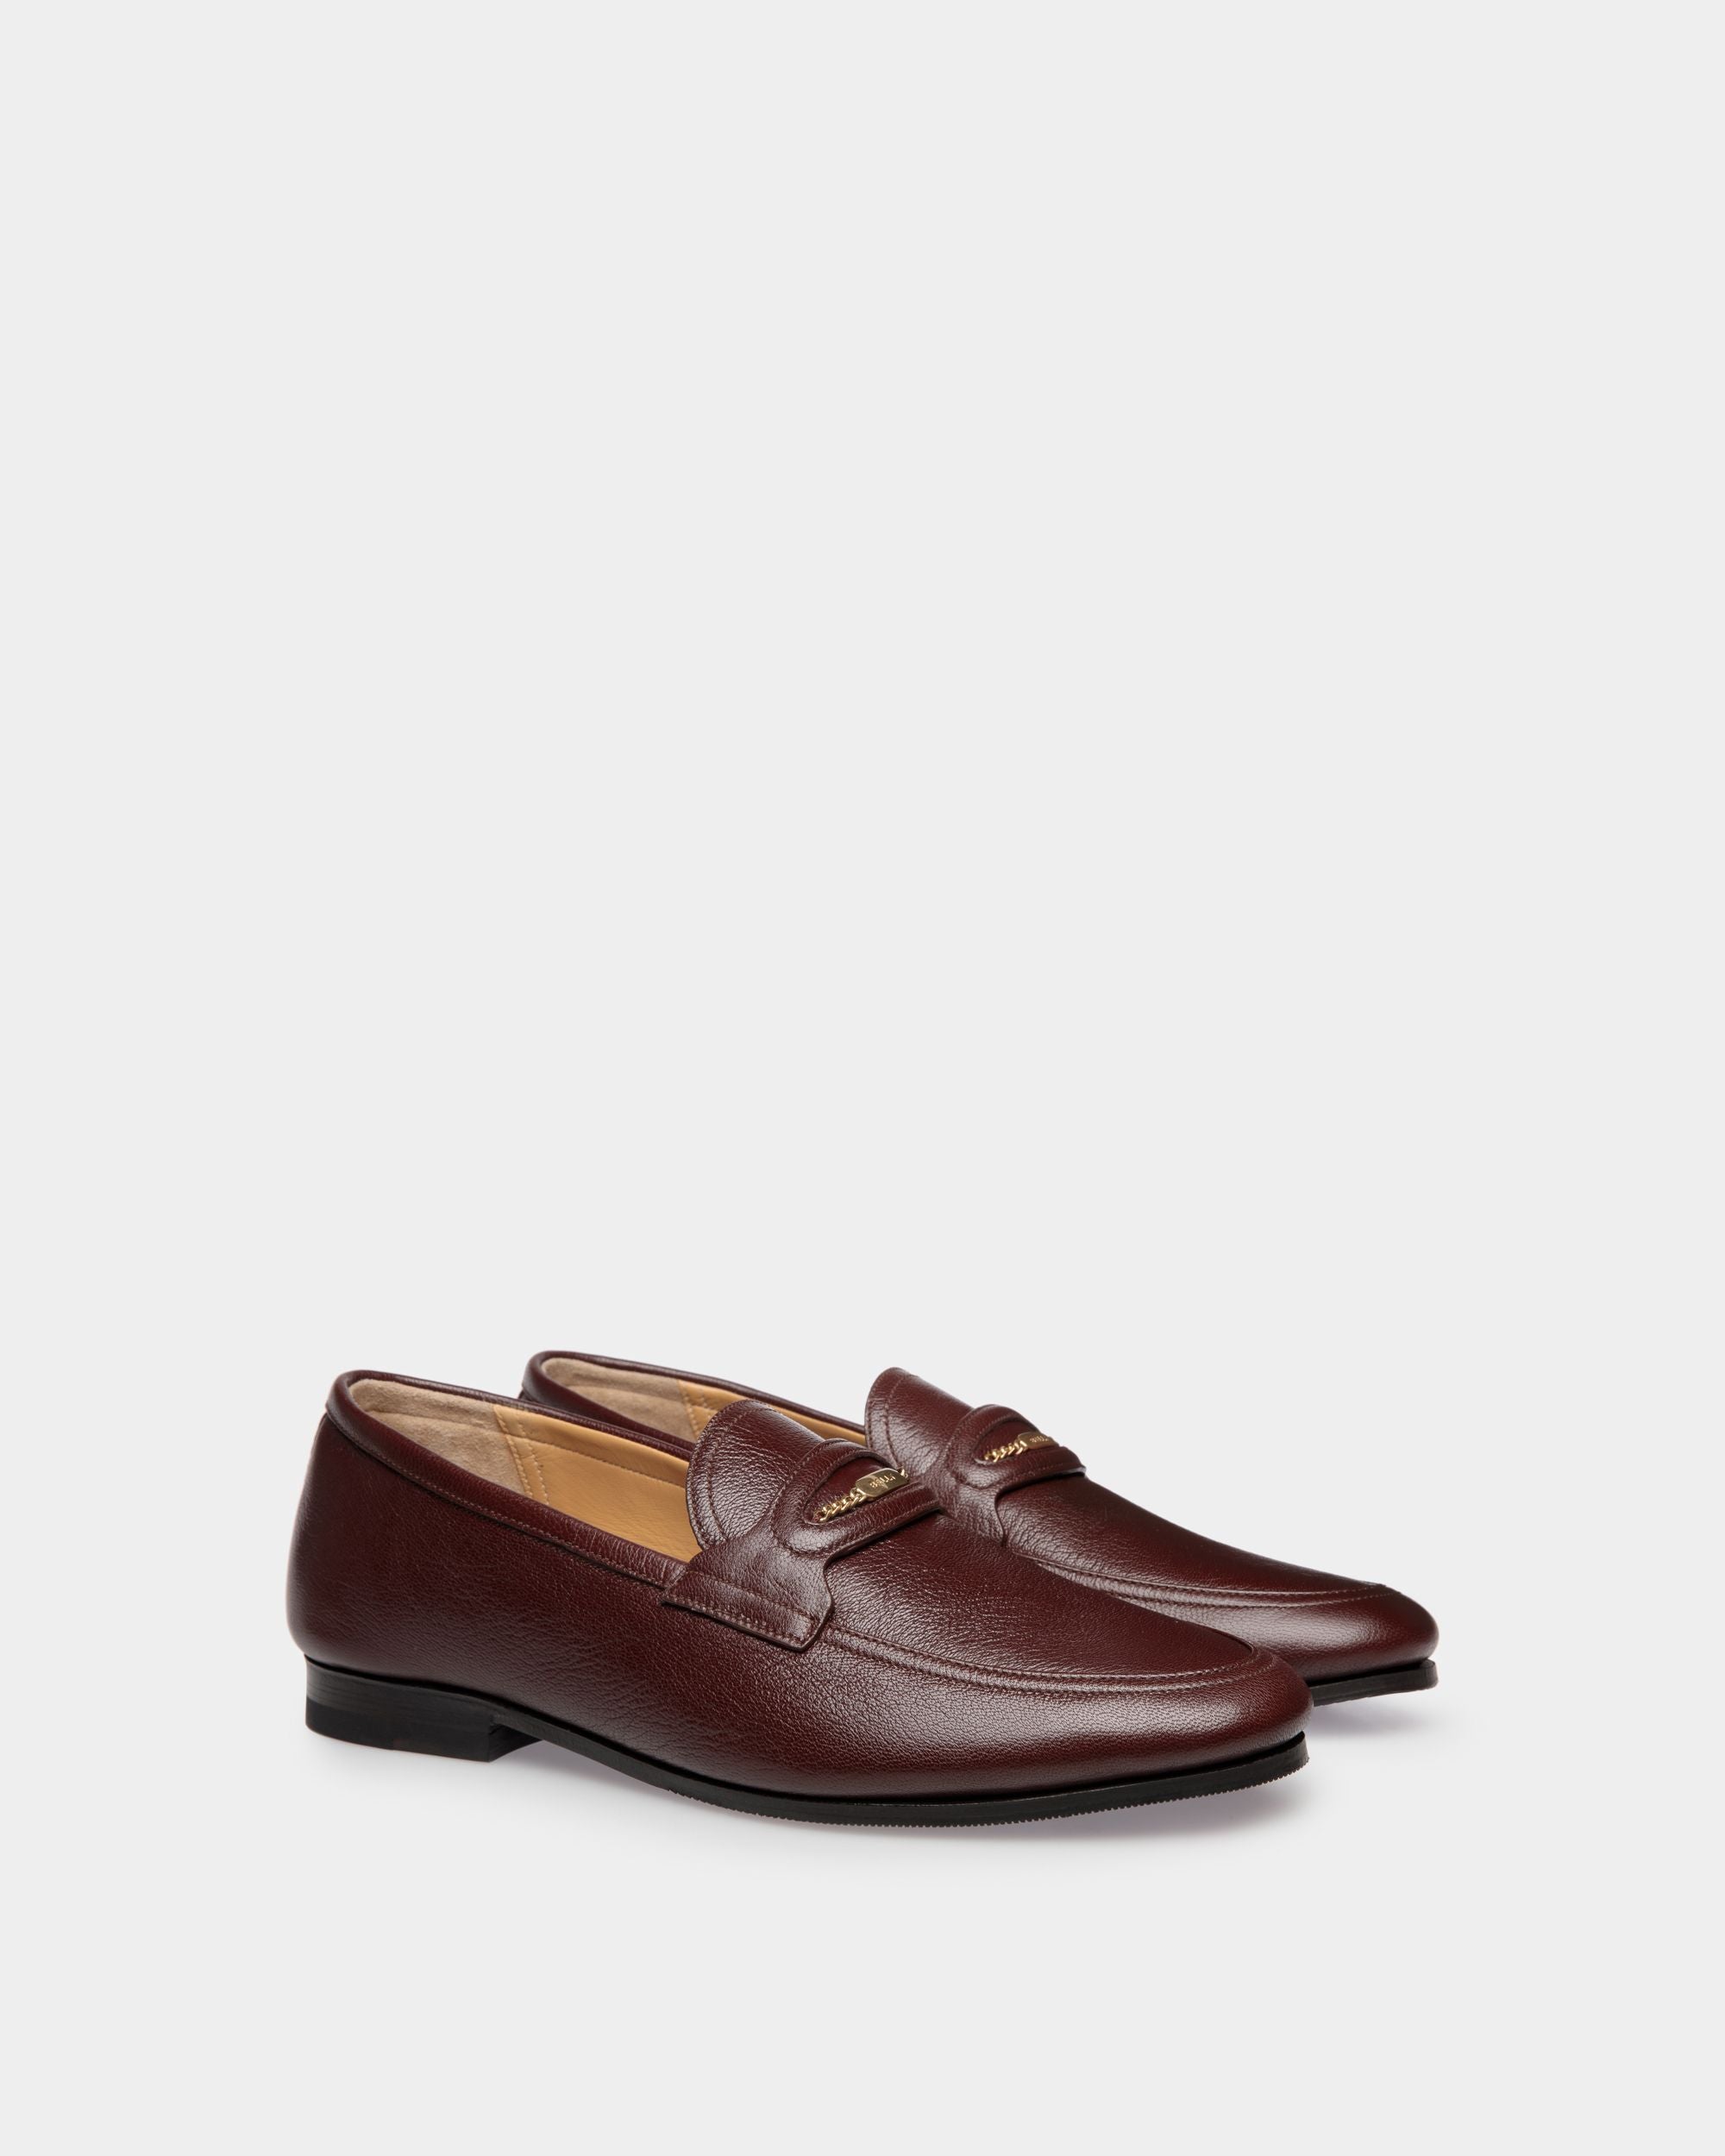 Plume | Men's Loafer in Chestnut Brown Grained Leather | Bally | Still Life 3/4 Front